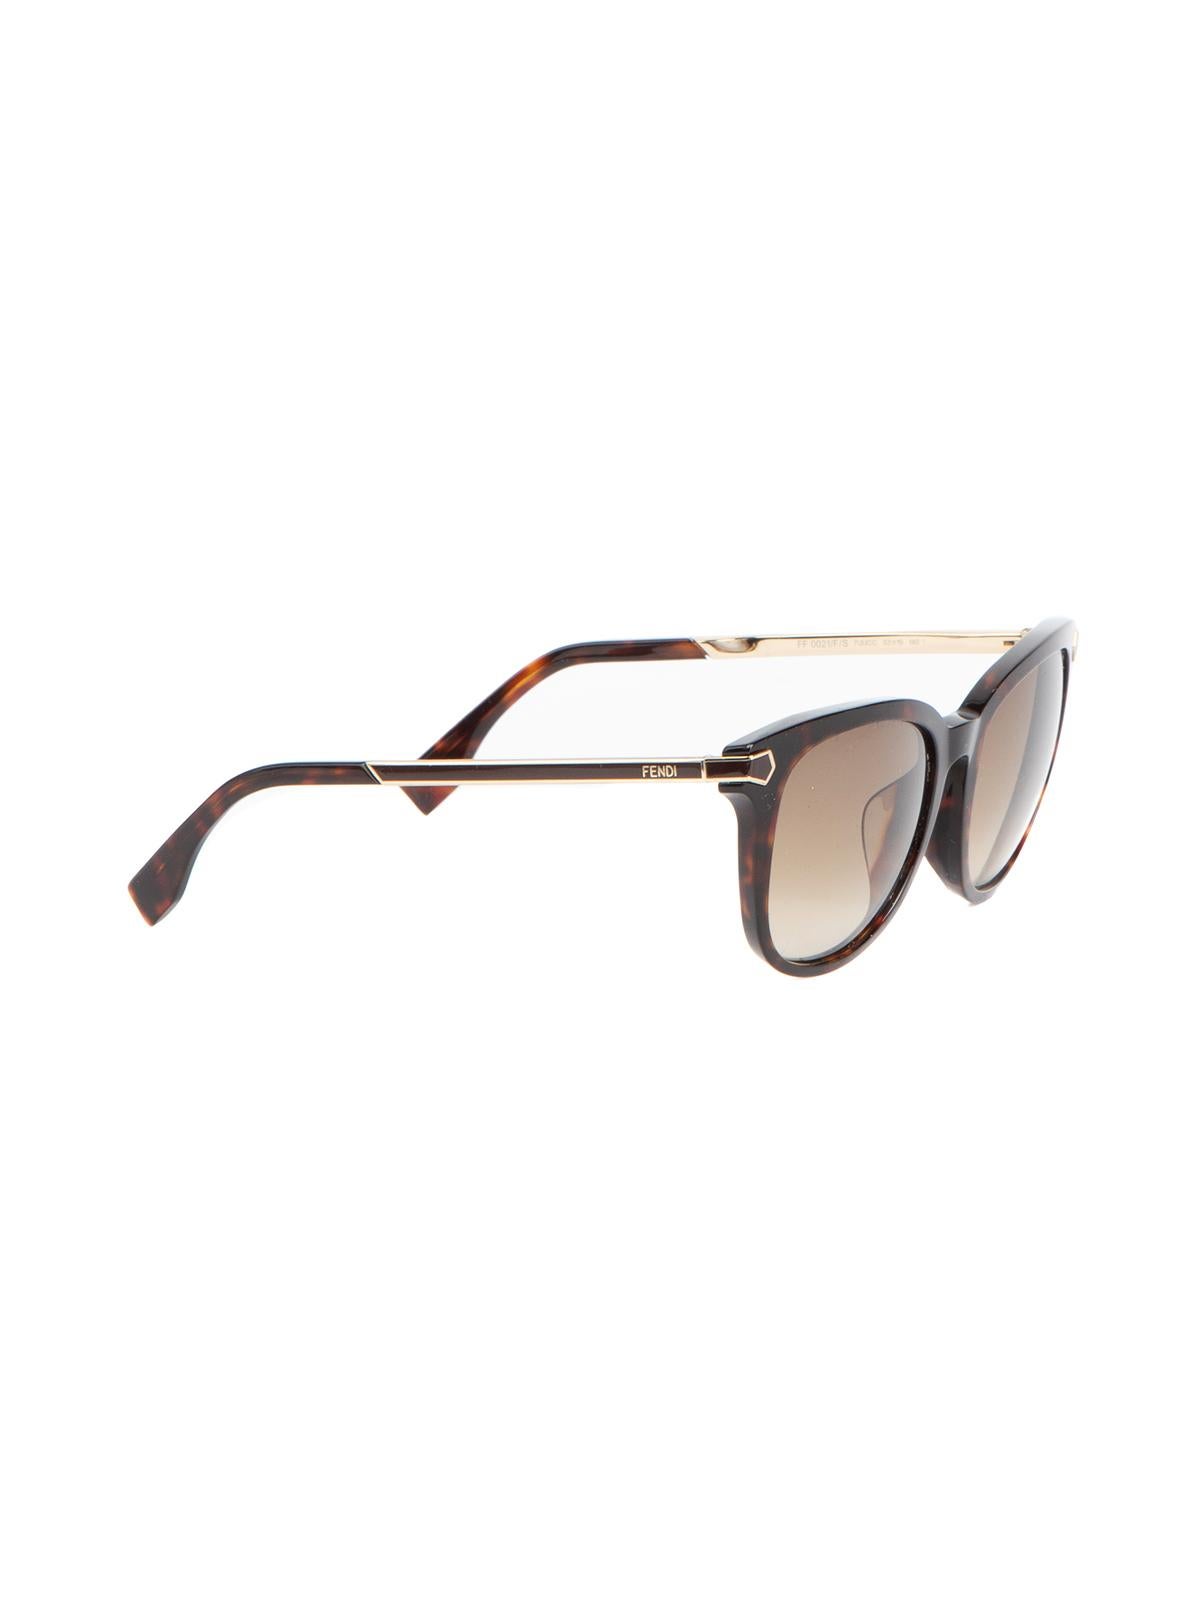 CONDITION is Very good. Minimal wear to sunglasses is evident. Minimal wear to lens on this used Chanel designer resale item. Details Brown tortoiseshell Acetate and metal Gold tone hardware Brand name on arms Made in Italy Composition Acetate,